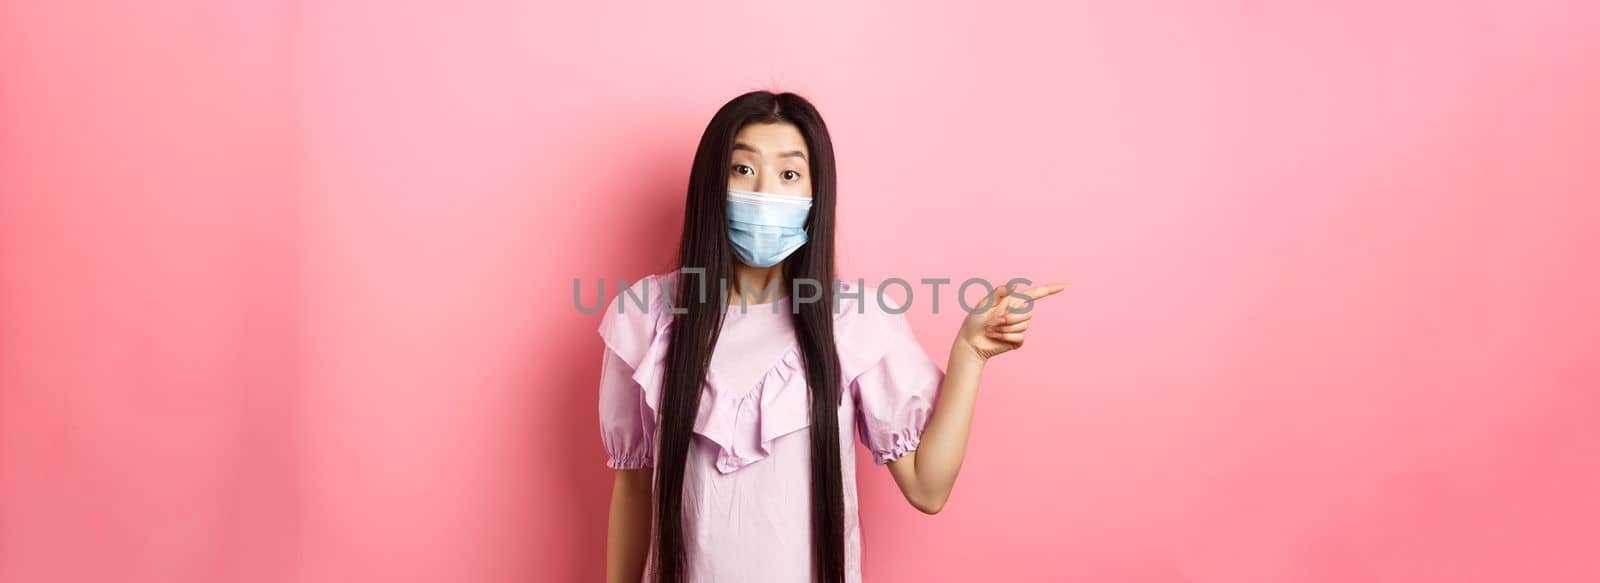 Covid-19, pandemic lifestyle concept. Curious asian girl in medical mask pointing left at logo, asking question about promotion, standing on pink background.